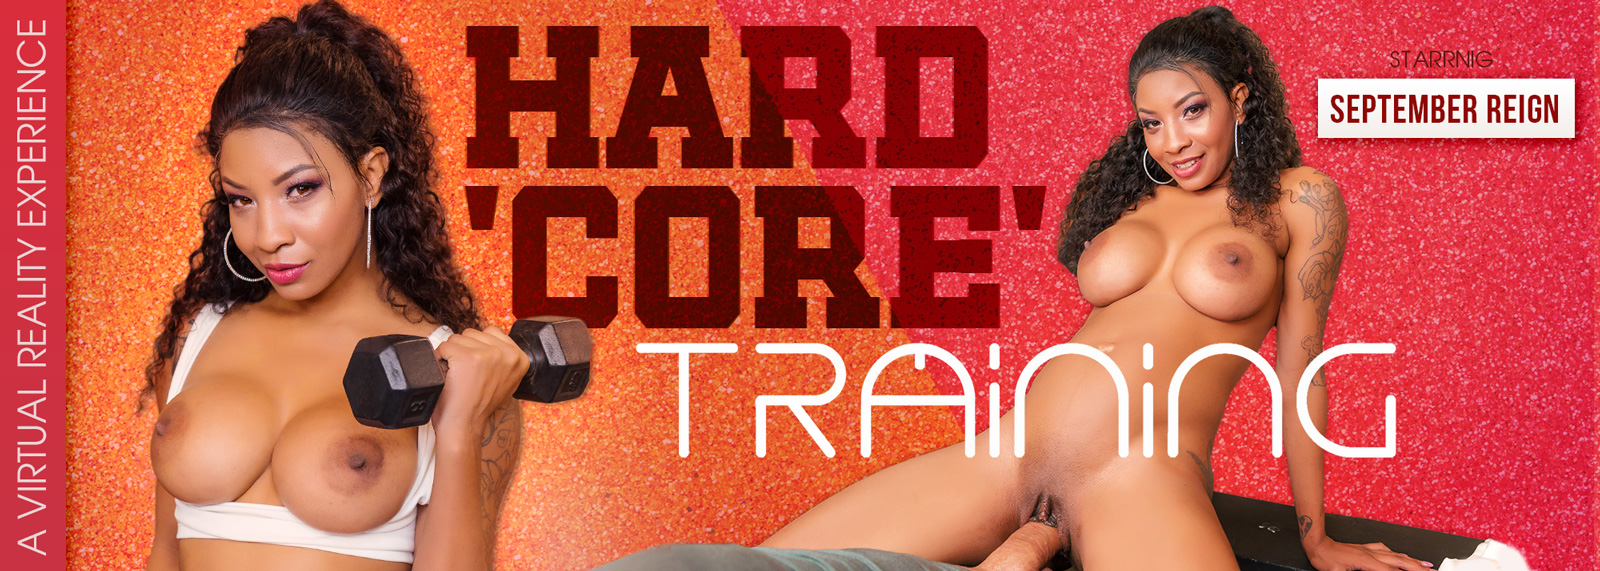 Hard 'Core' Training with September Reign  Slideshow